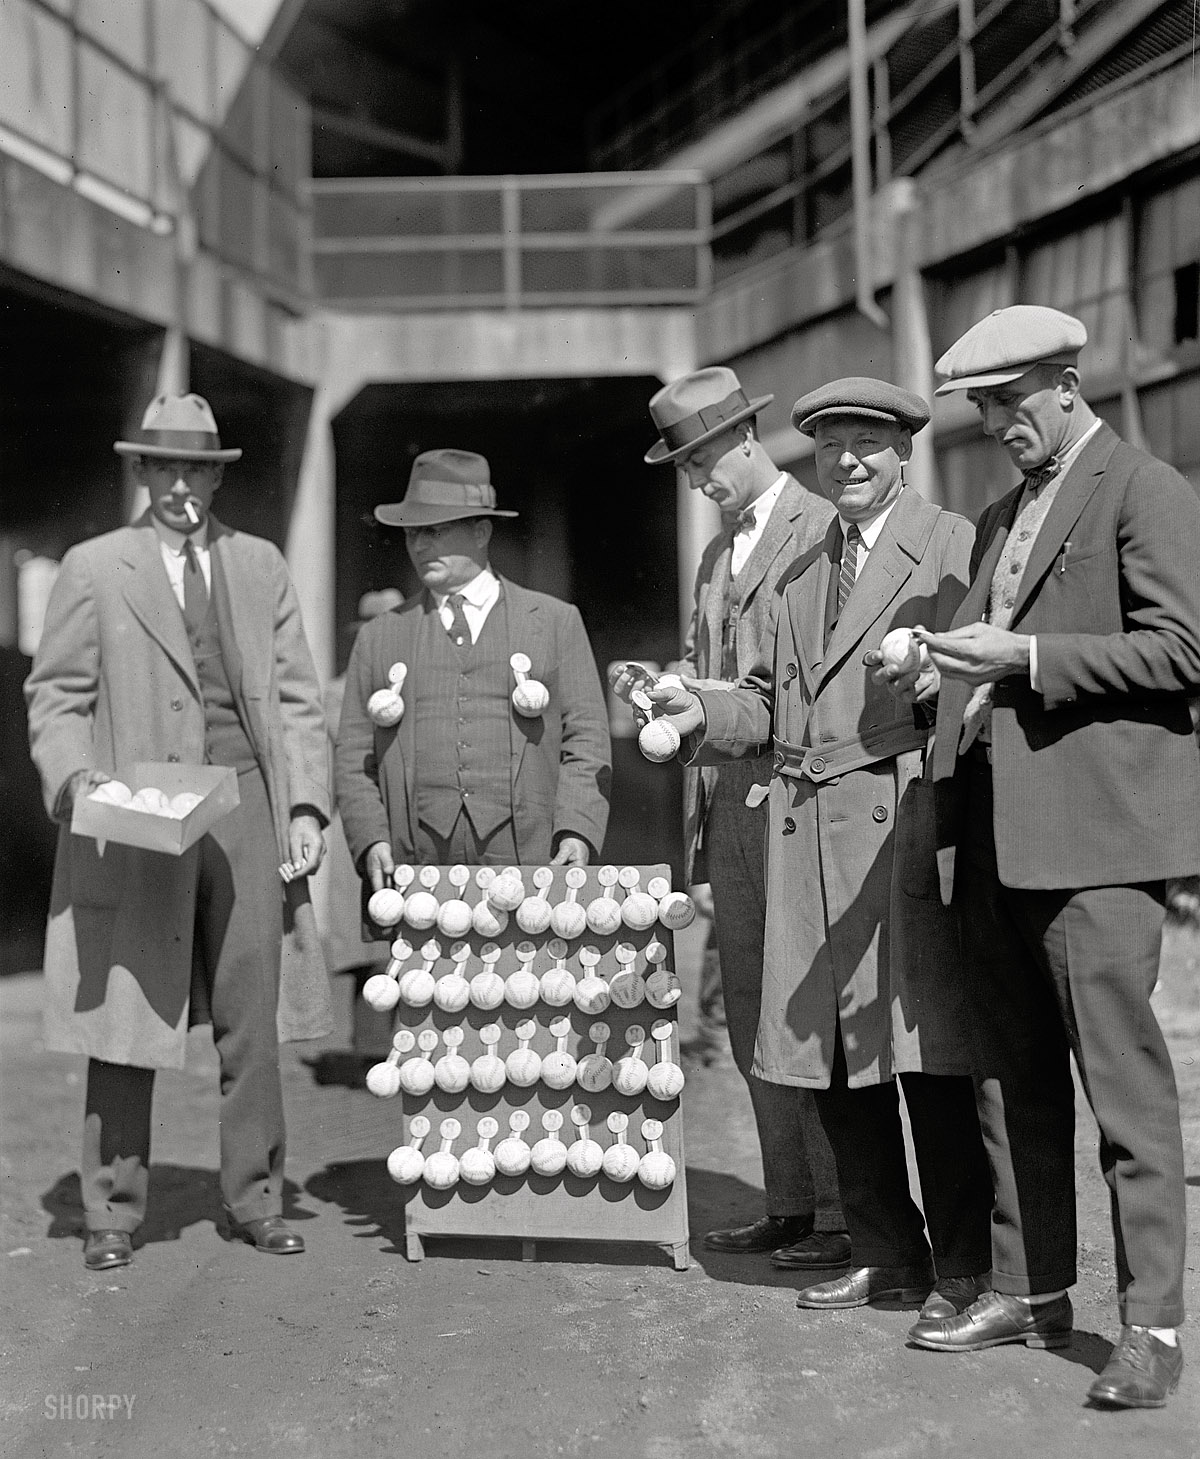 October 1, 1924. "Mogridge, Phillips & Martina buying baseball souvenirs." Washington players George Mogridge and Joe Martina with Nationals announcer E. Lawrence Phillips (2nd from right) at Griffith Stadium three days before the start of the World Series between the Nationals and Giants. View full size.